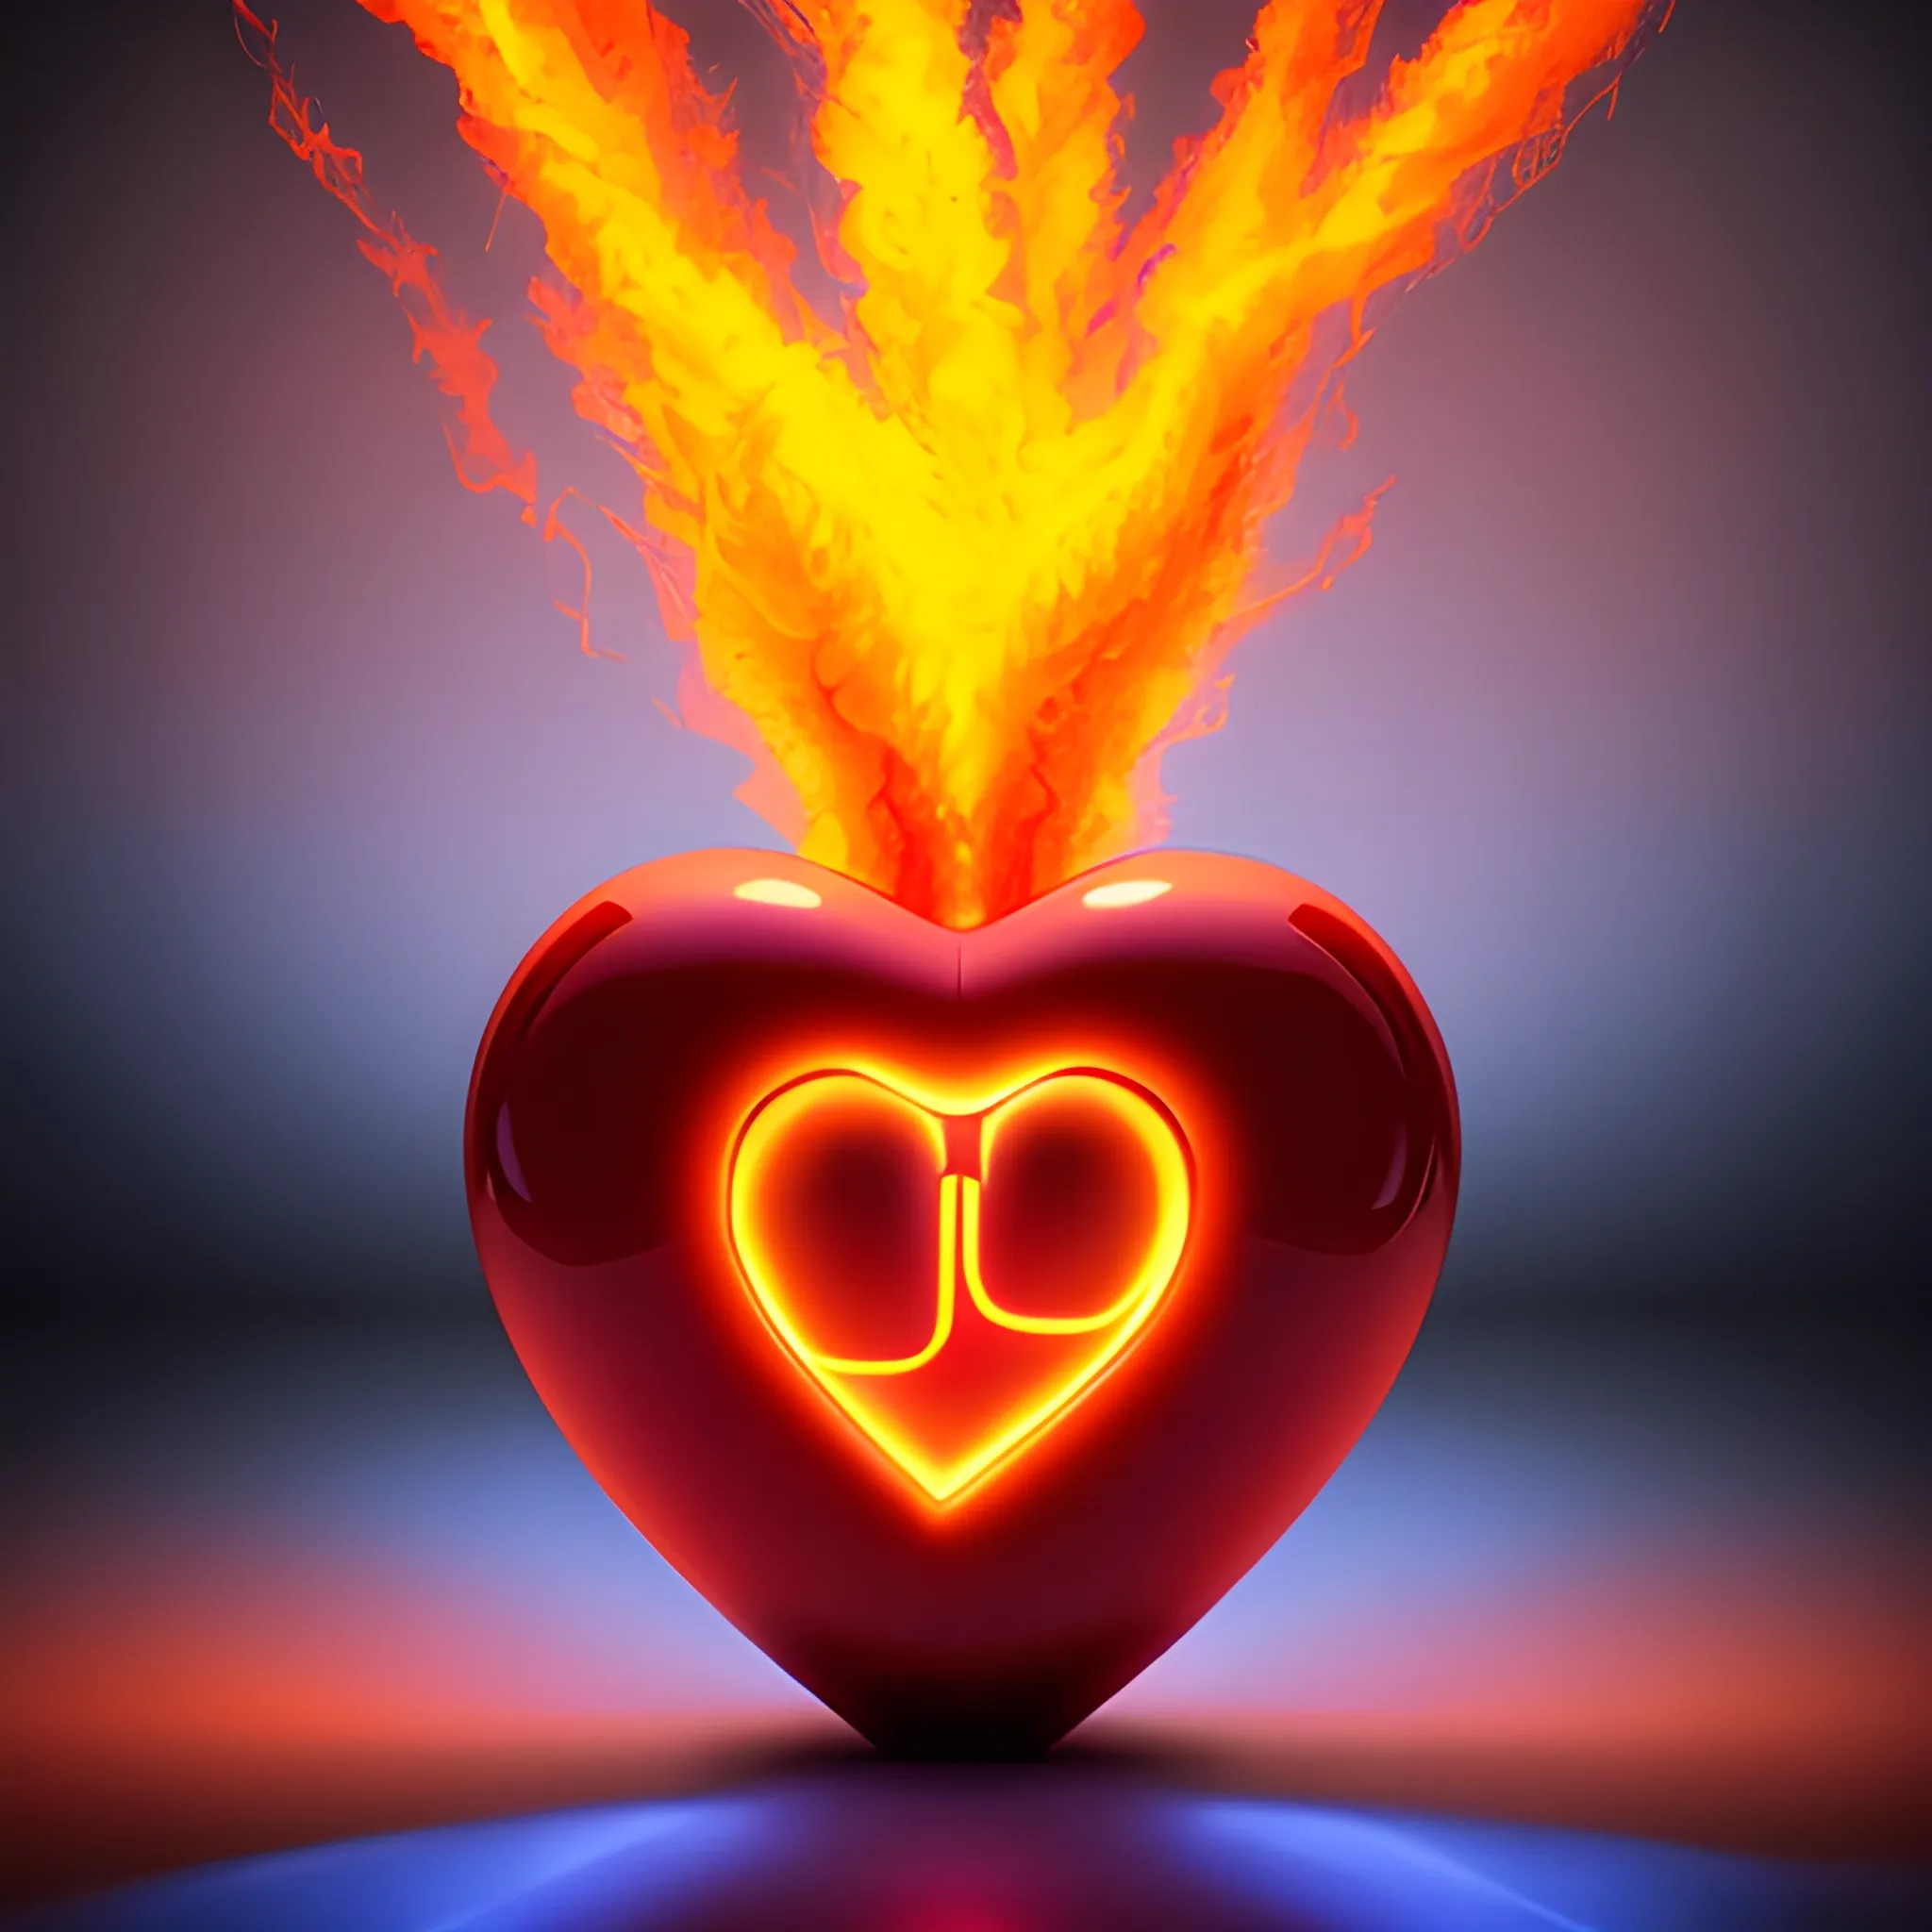 A Pixar 3D animation featuring a blazing fire consuming a heart ...